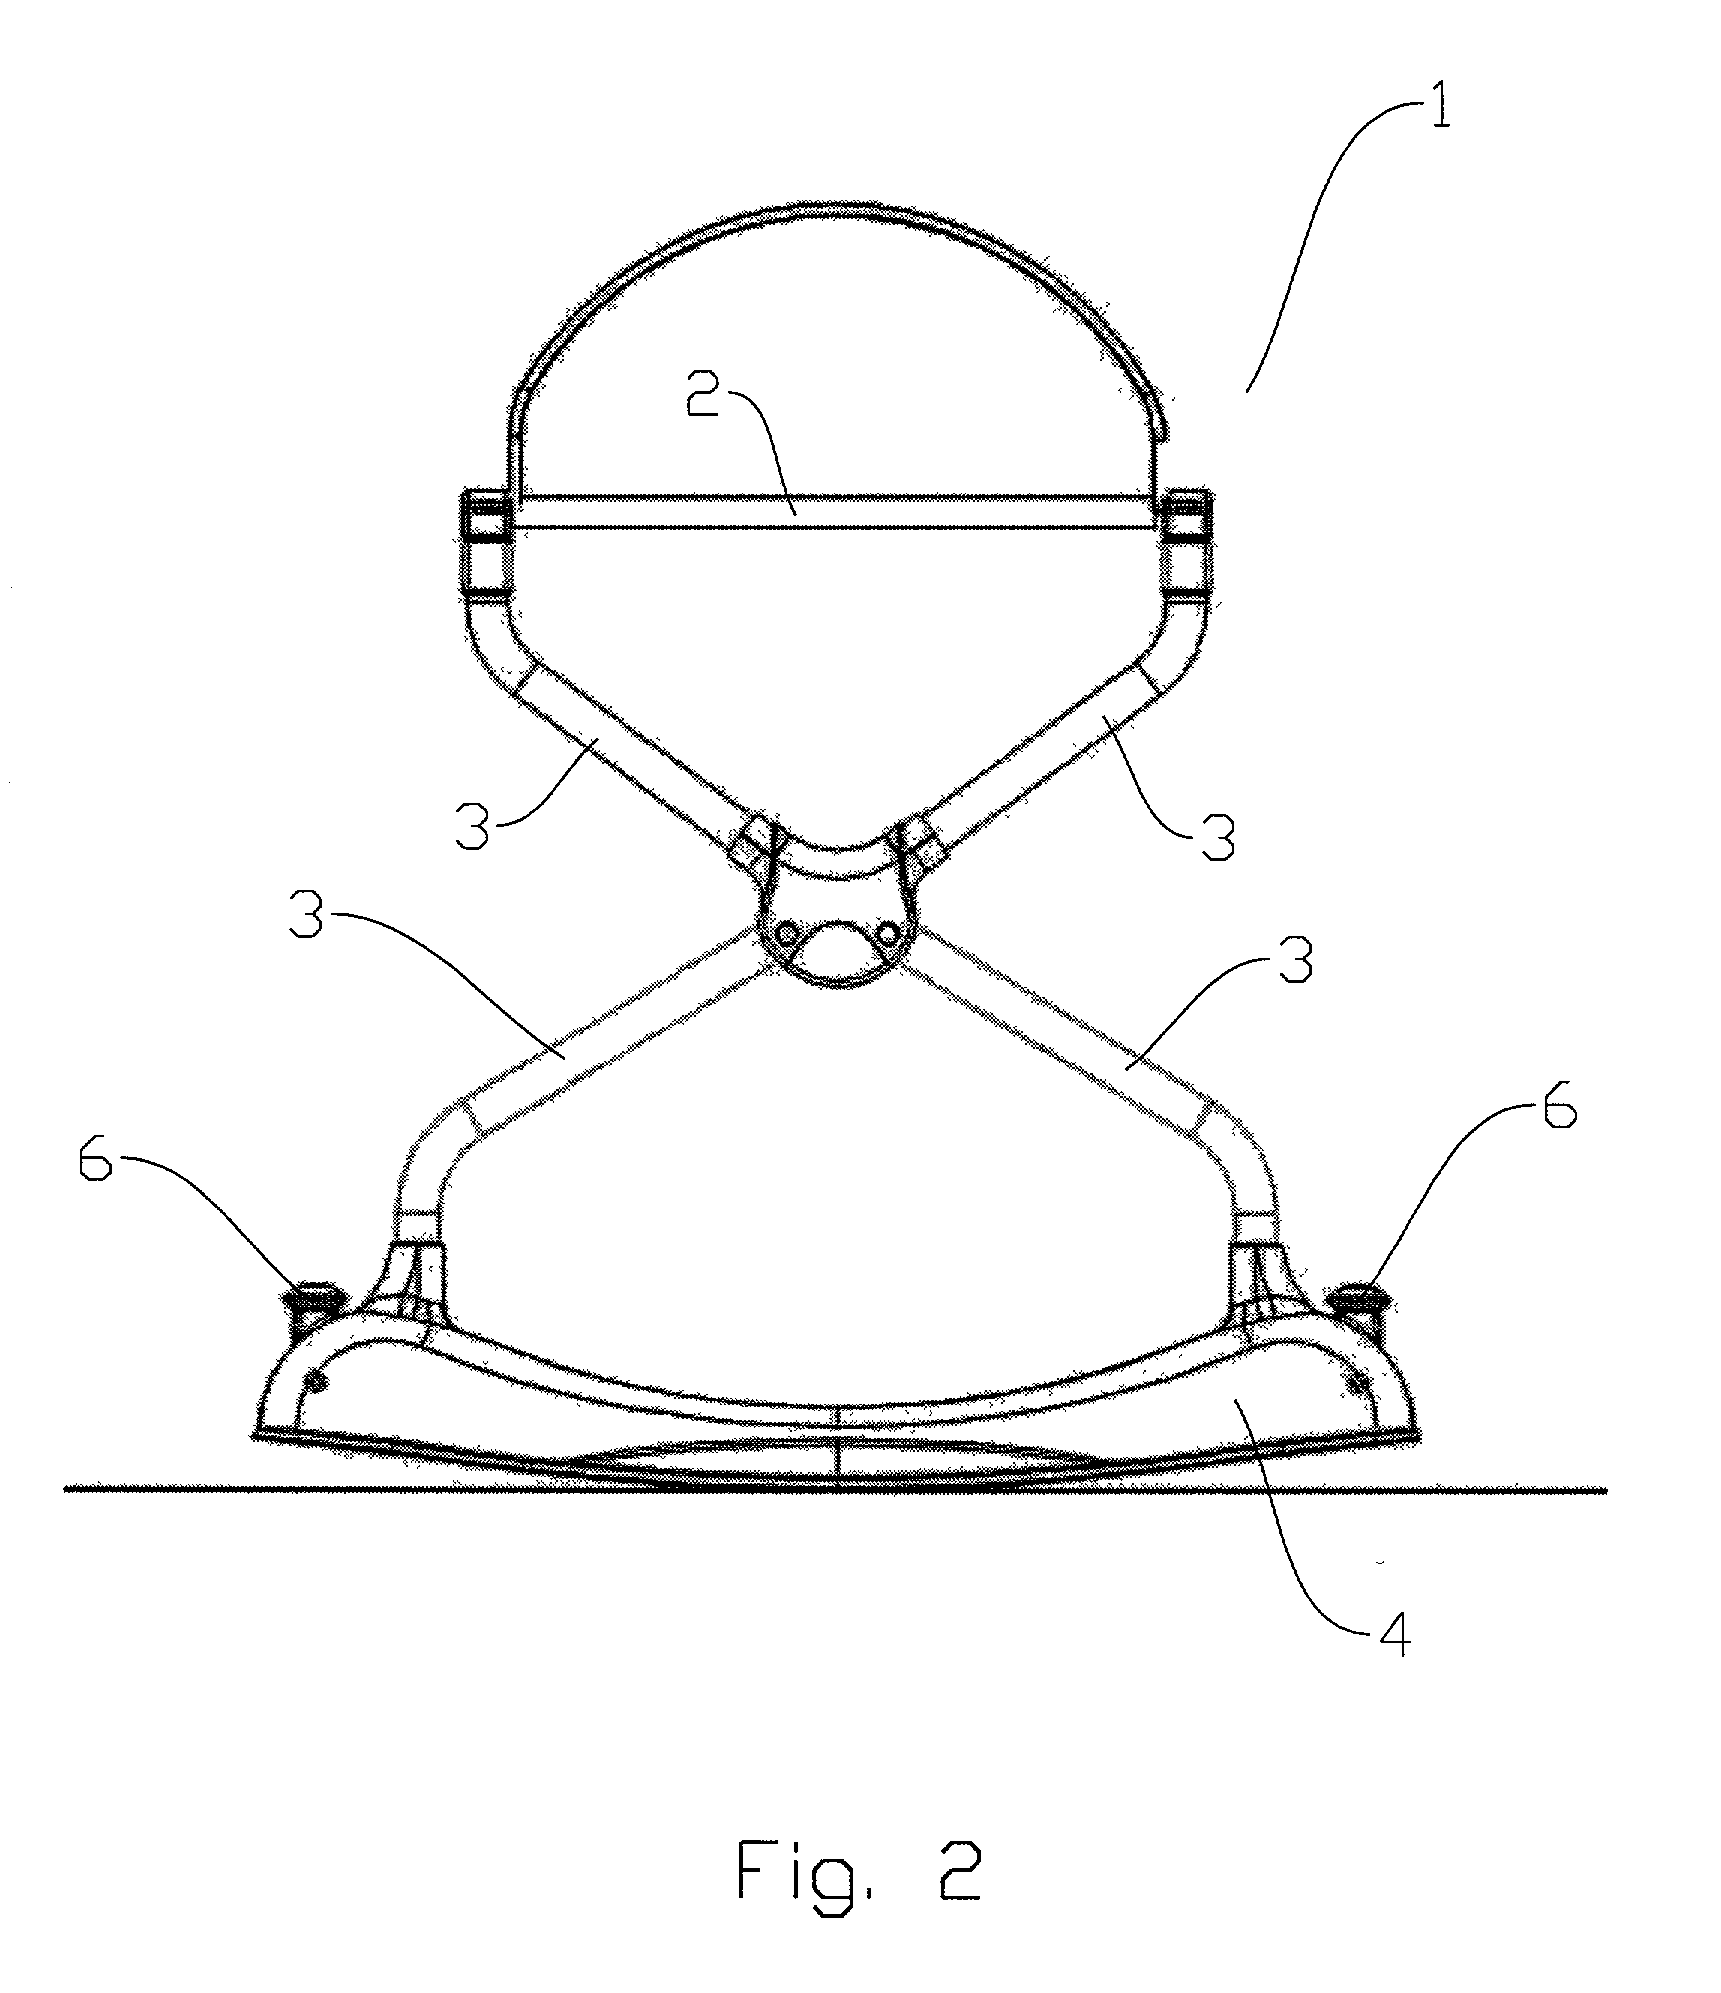 Wheel receiving device for baby sleeping bed